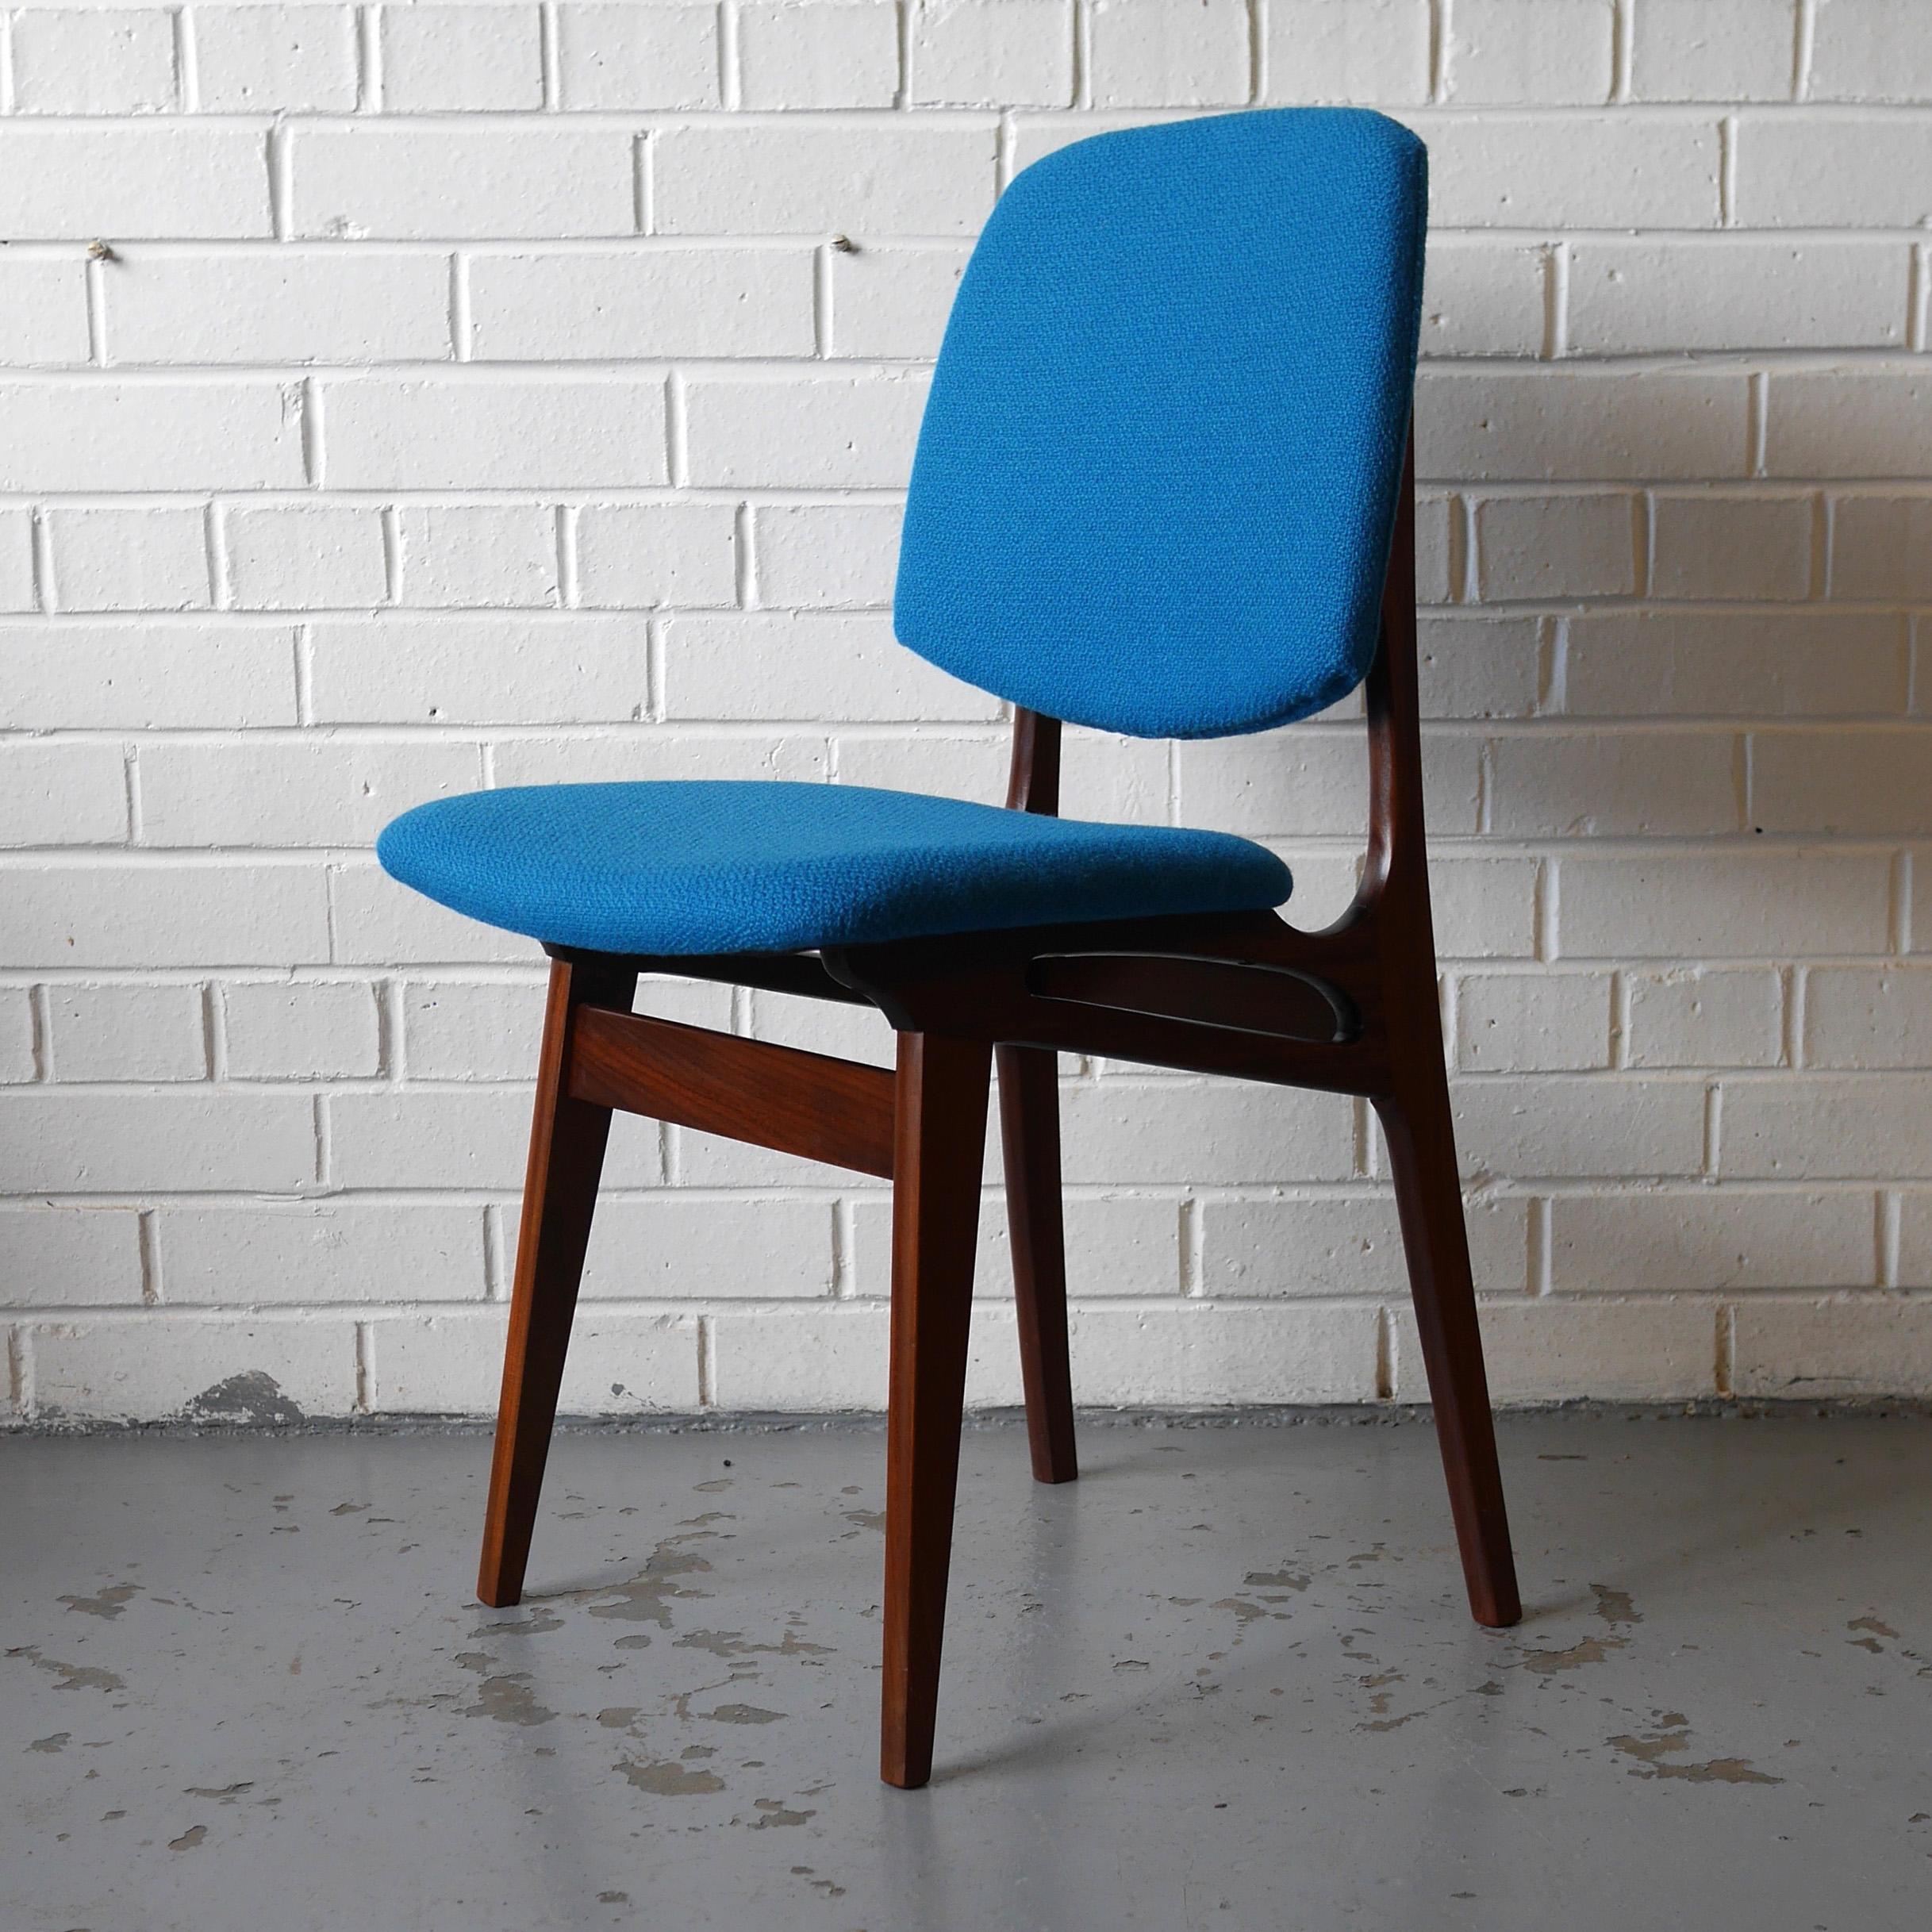 Set of Four Solid Afrormosia Dining Chairs with Blue Wool Upholstery, circa 1961 For Sale 3